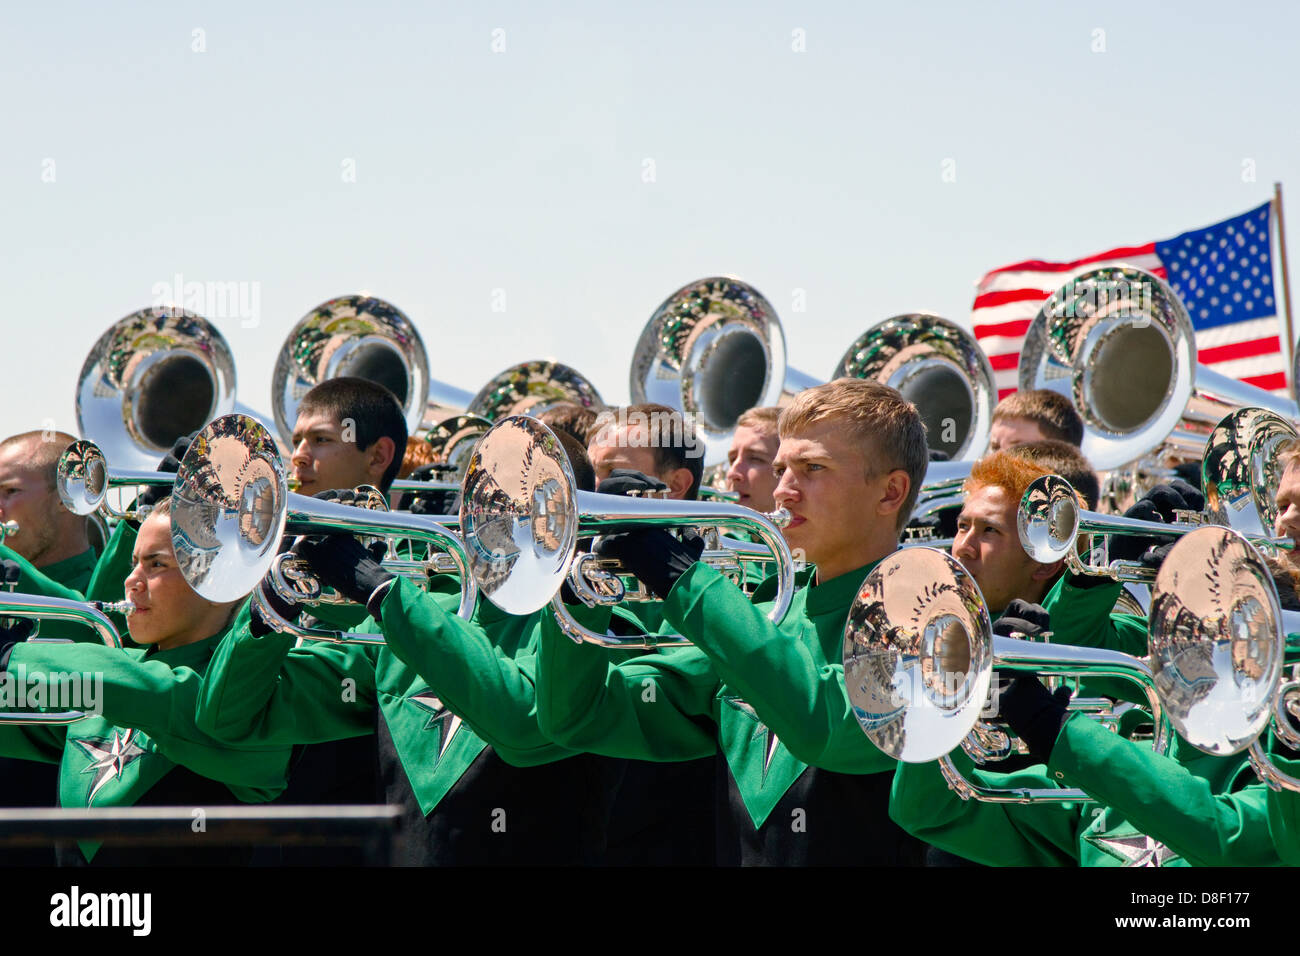 High School band entertains crowds at 4th of July celebrations in Seaside Oregon Stock Photo